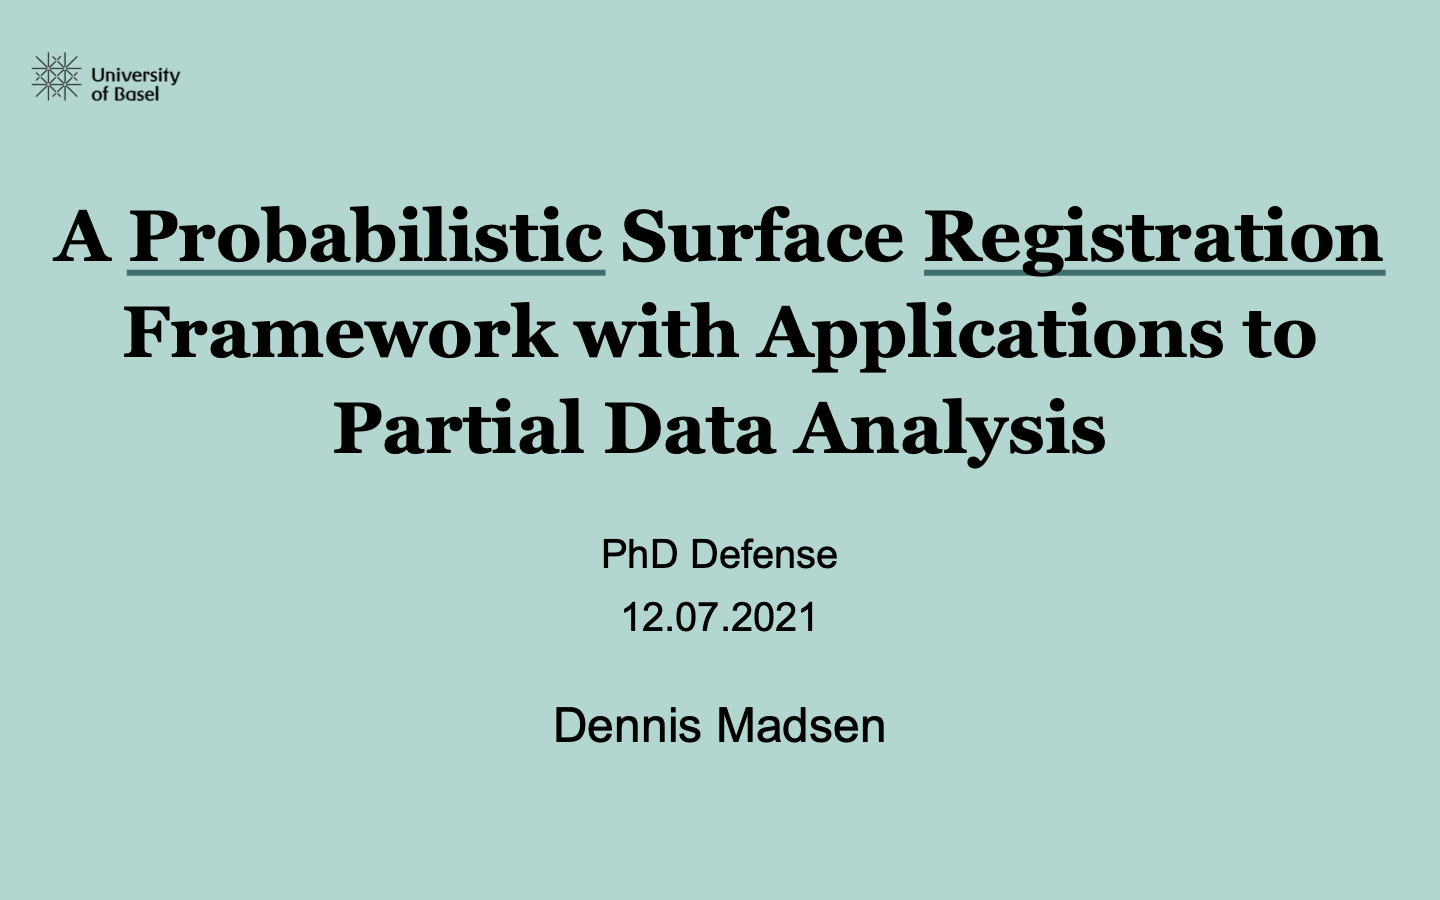 A Probabilistic Surface Registration Framework with Applications to Partial Data Analysis